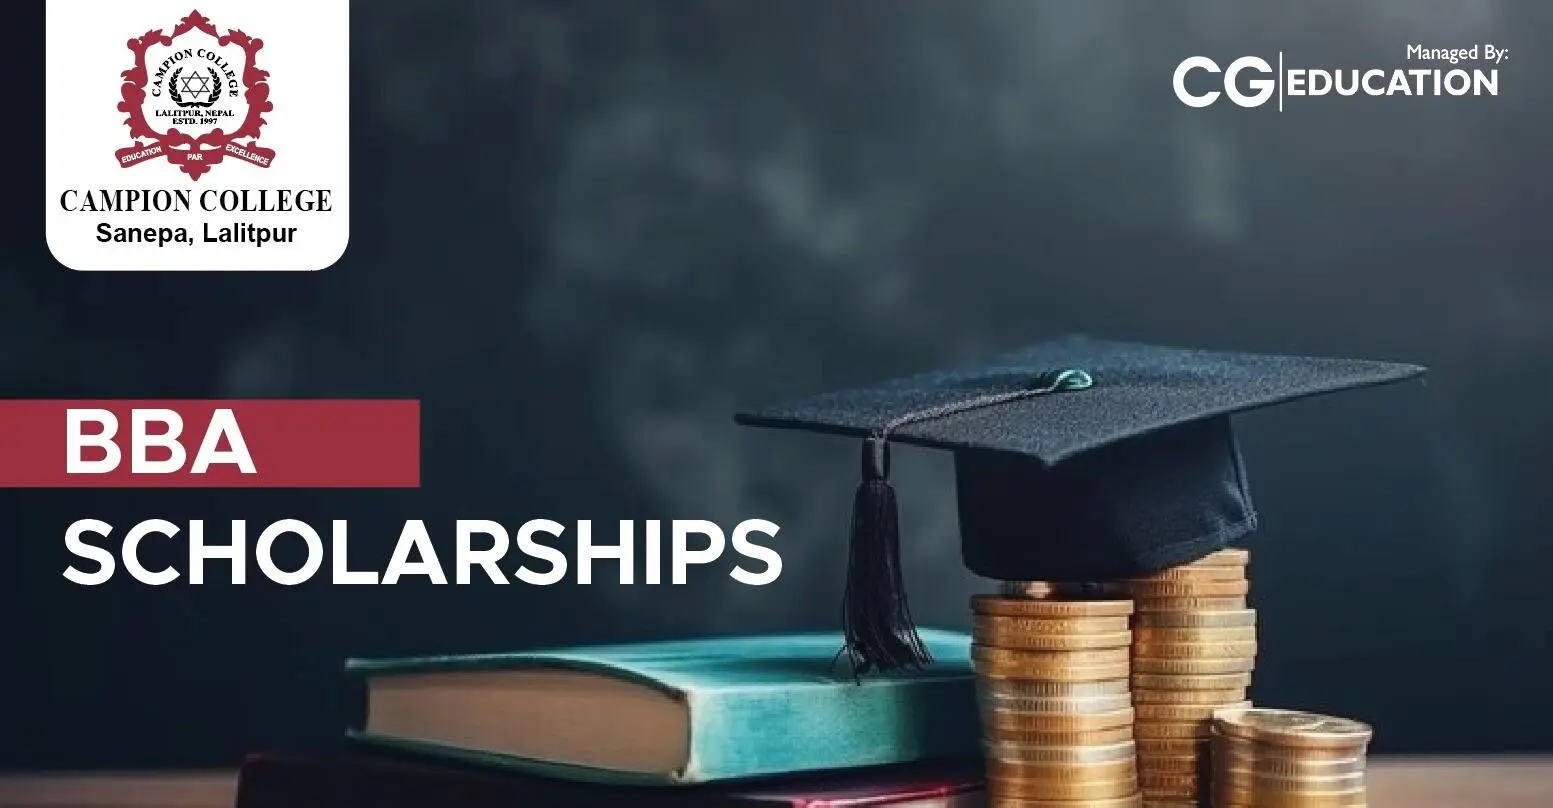 BBA scholarships opportunities and BBA Fee Structure at campion college